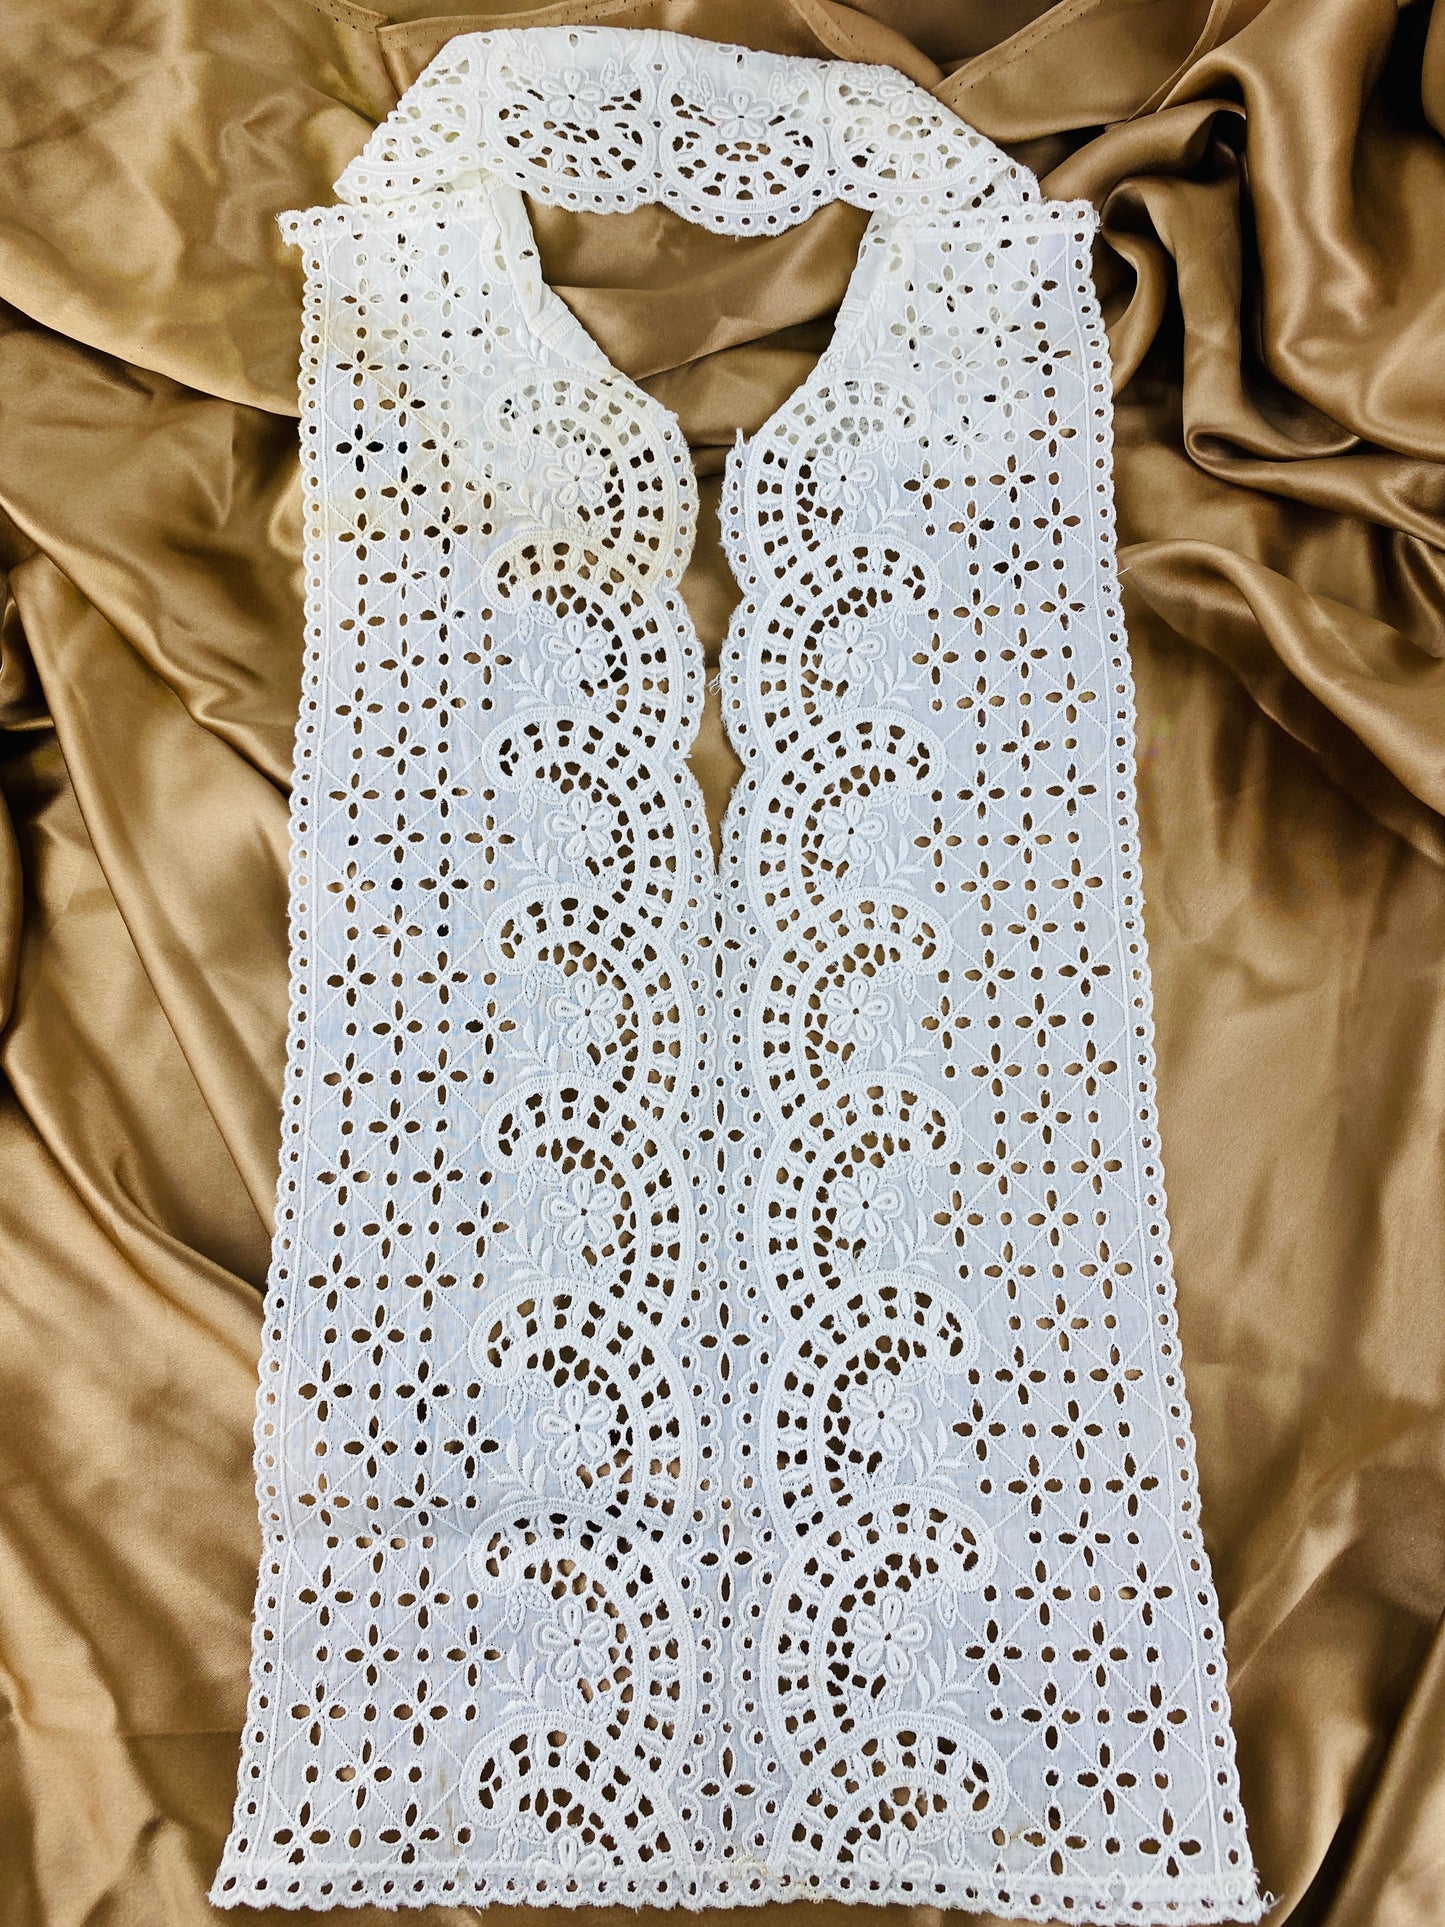 Vintage 1950s White Cotton Cutwork Embroidery Bib/ Dickie With Collar